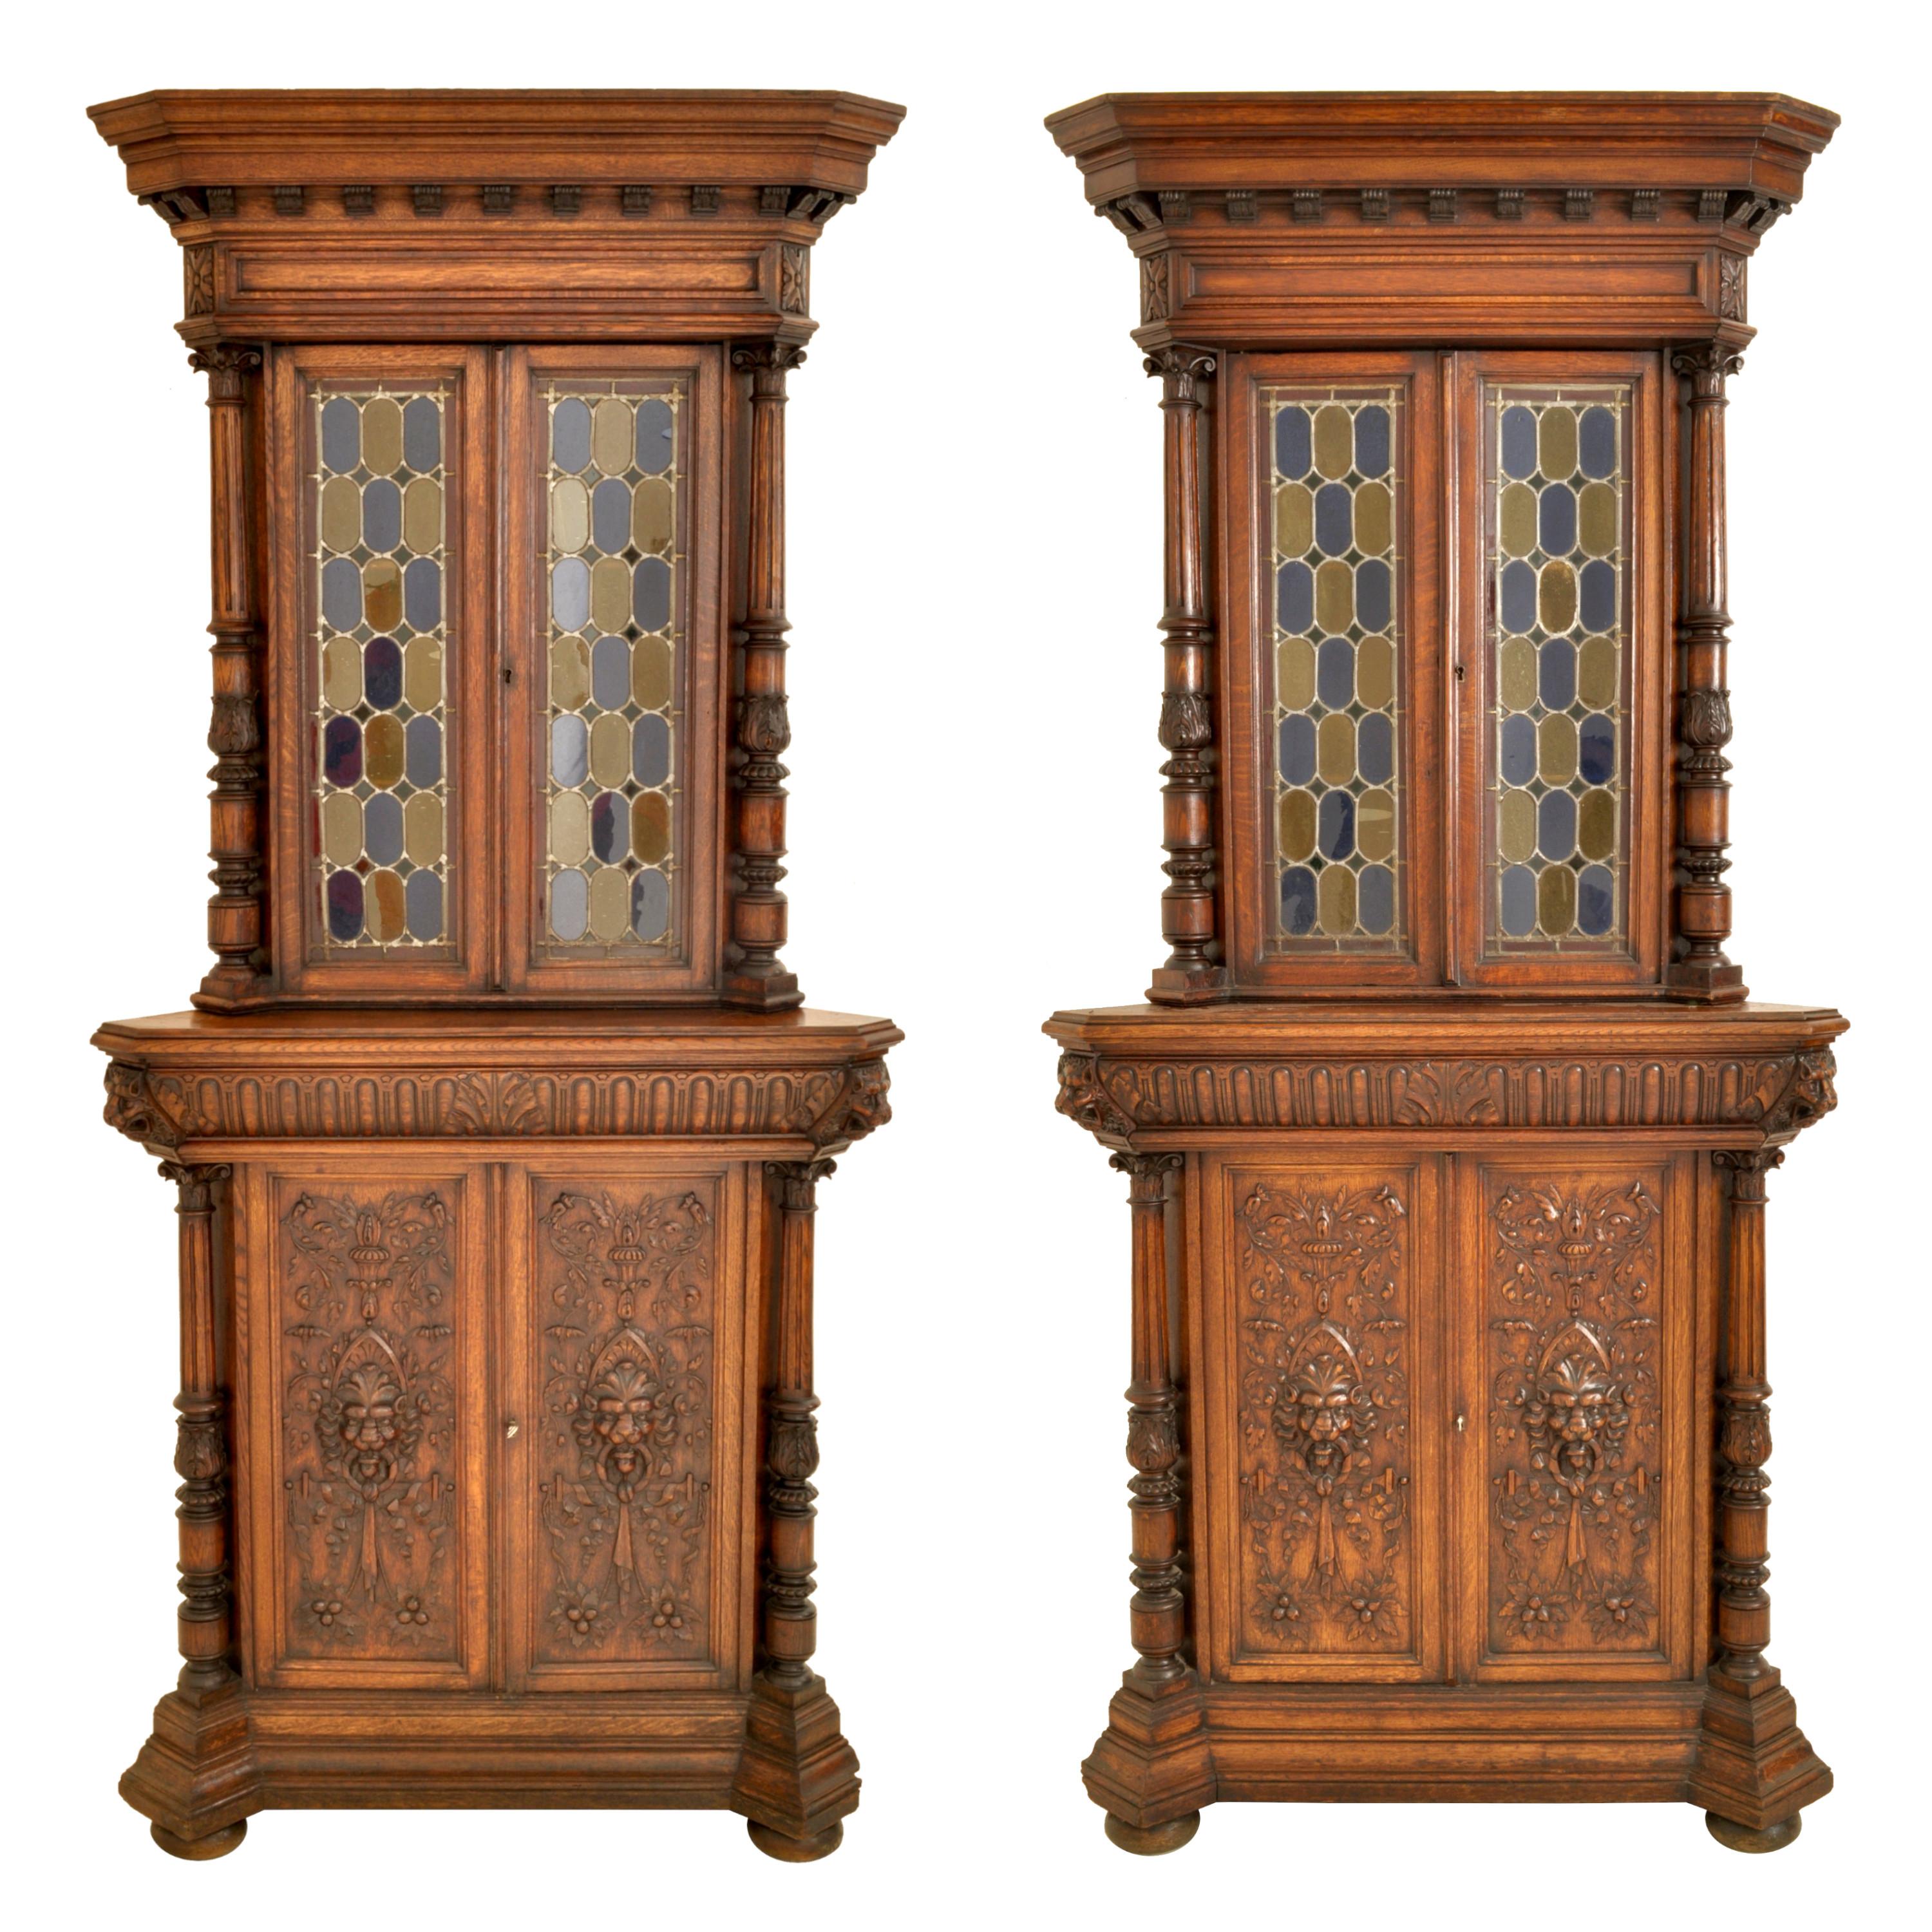 Pair Antique French Renaissance Revival Carved Oak Stained Glass Corner Cabinets